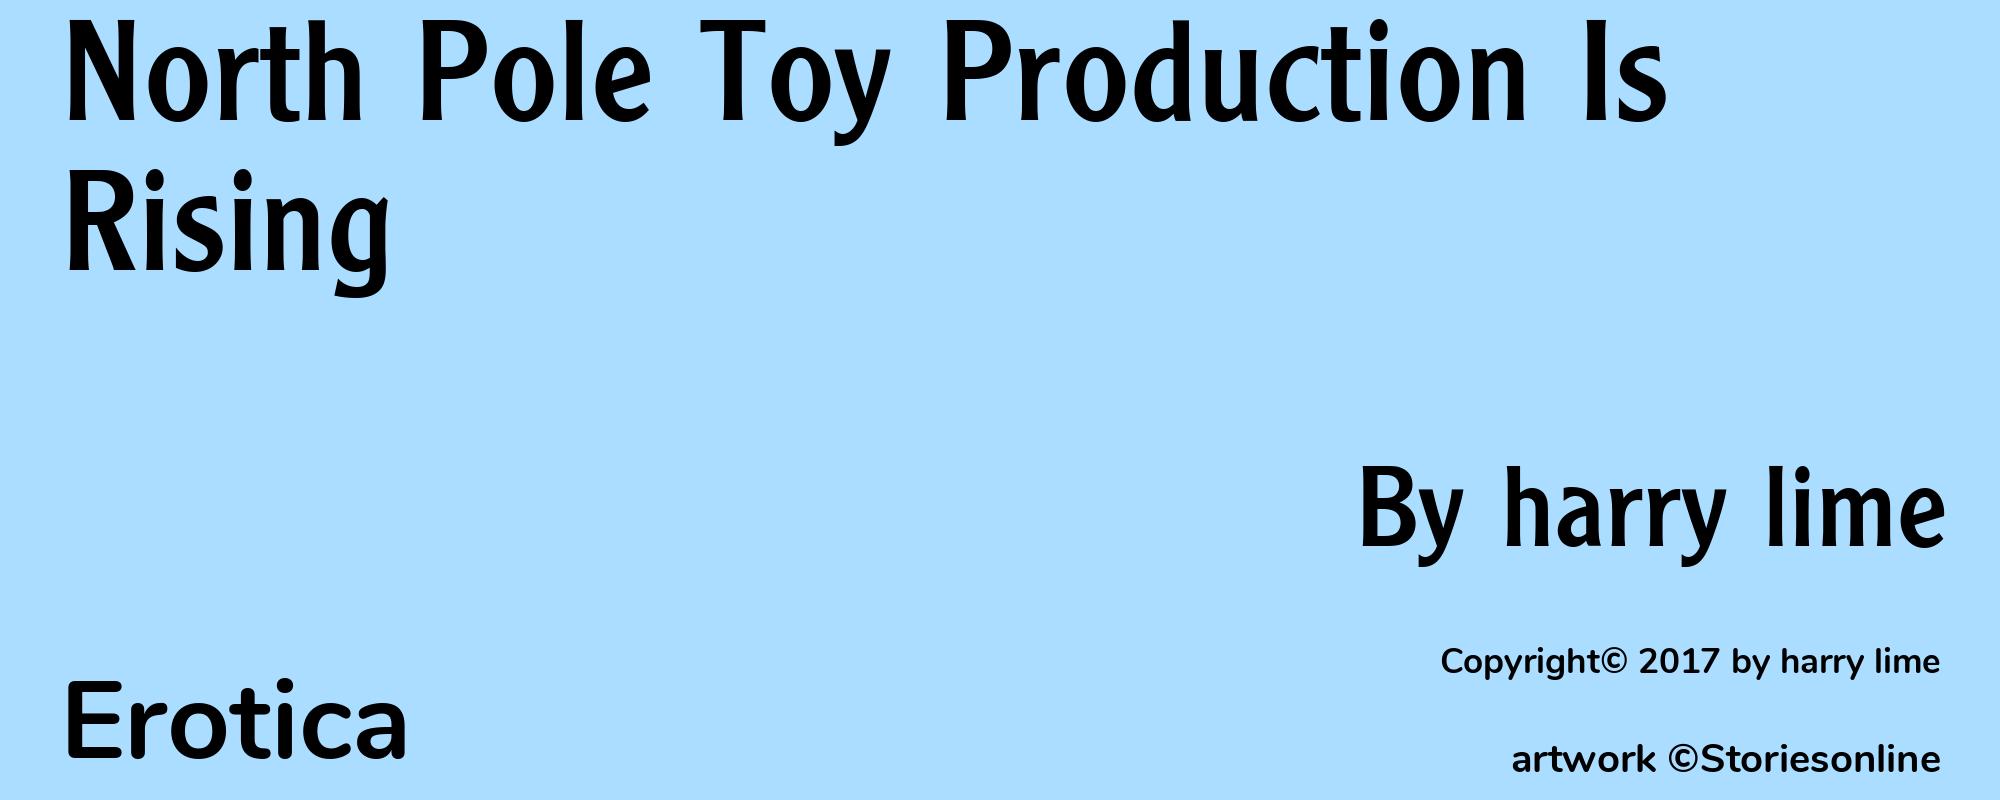 North Pole Toy Production Is Rising - Cover